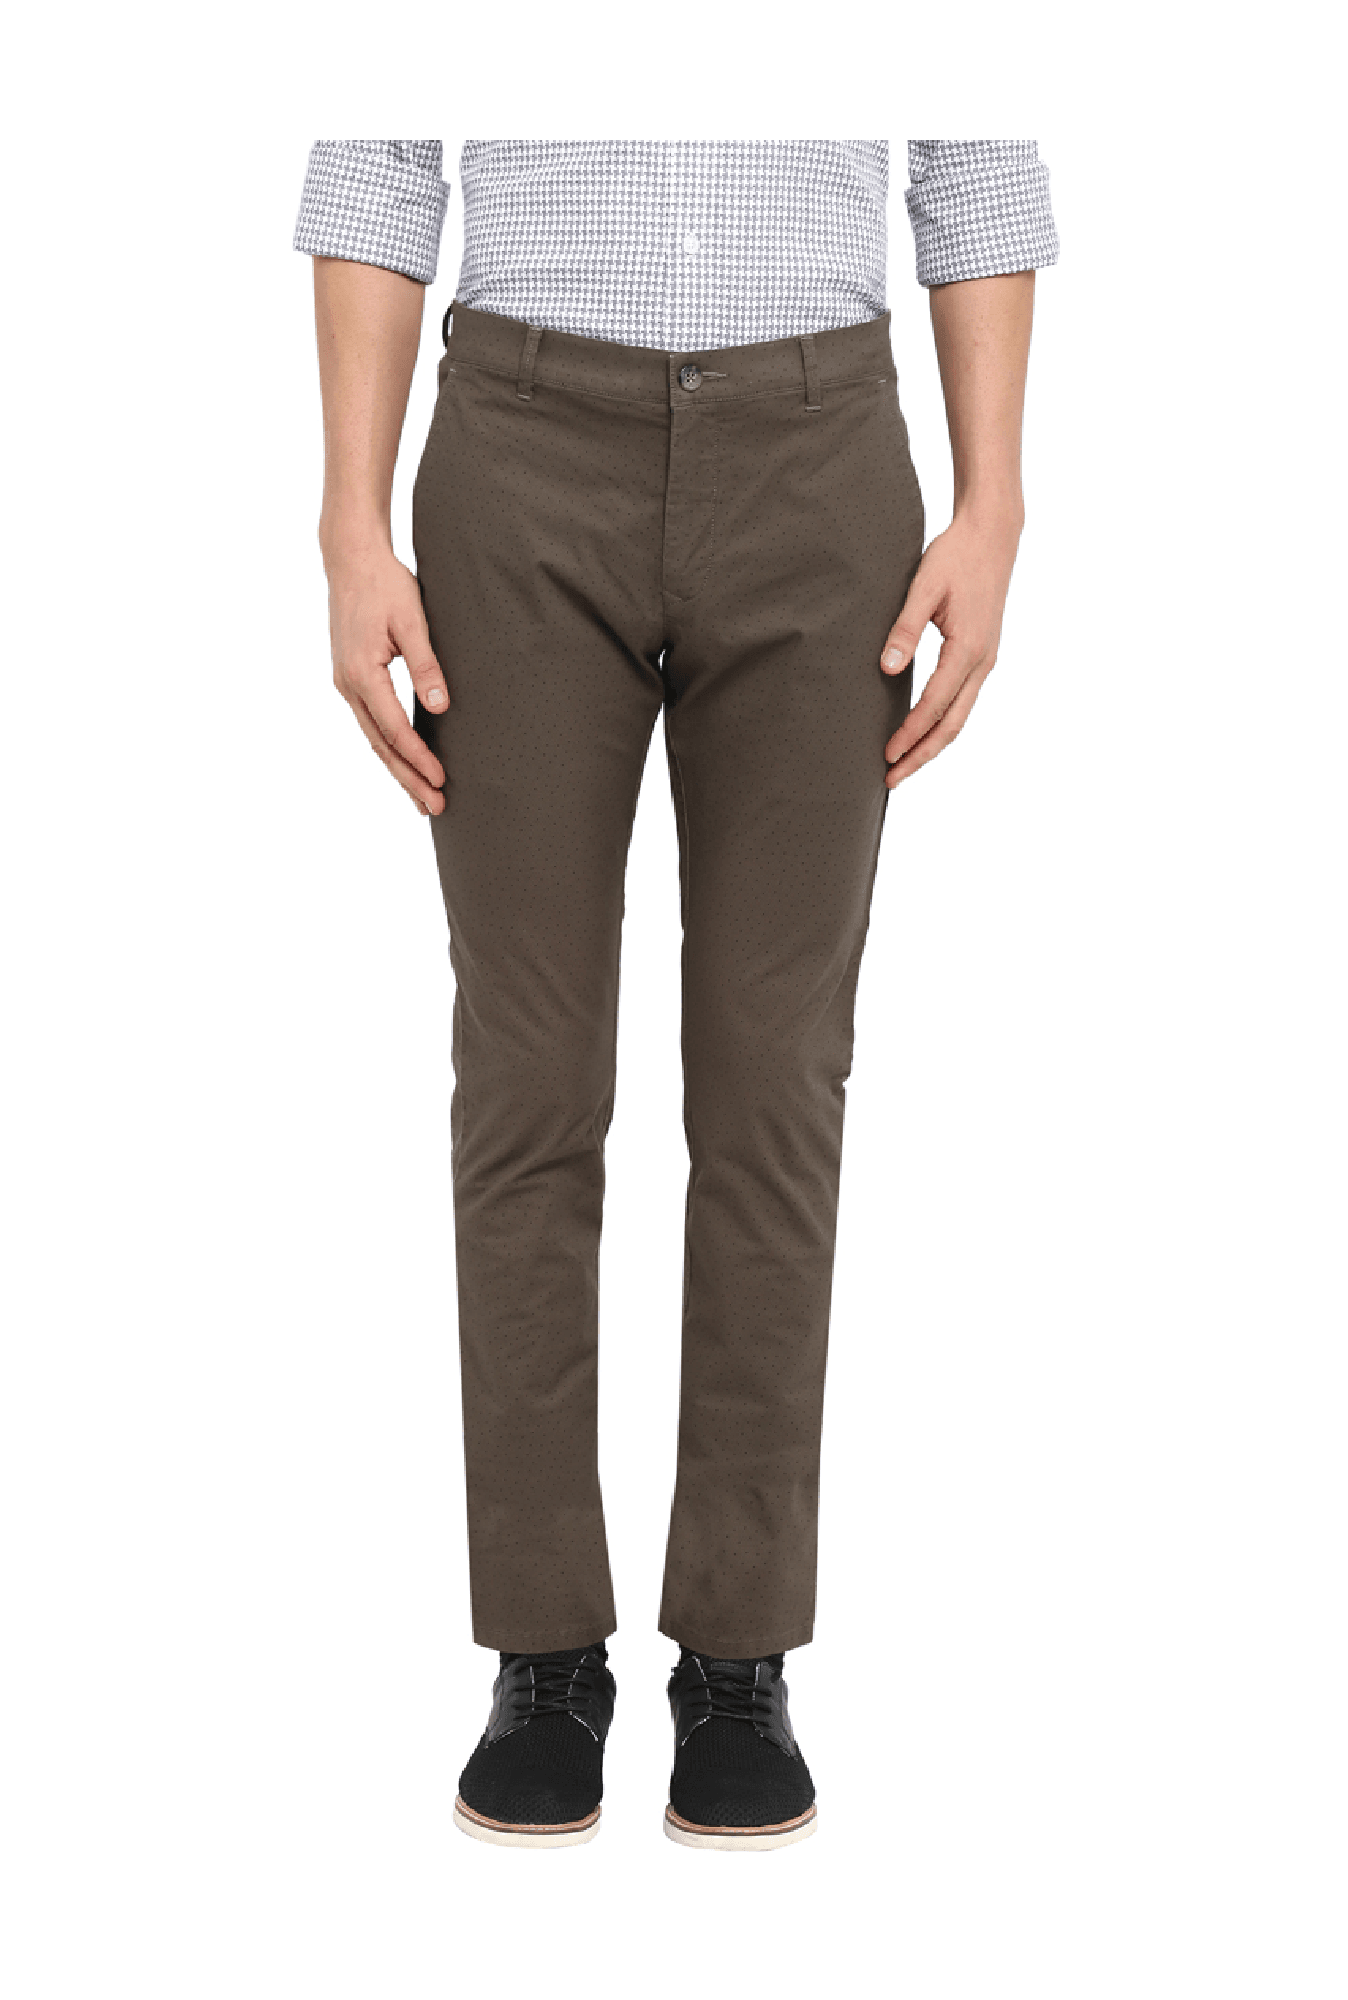 Buy JACK AND JONES Solid Cotton Regular Fit Mens Casual Trousers   Shoppers Stop